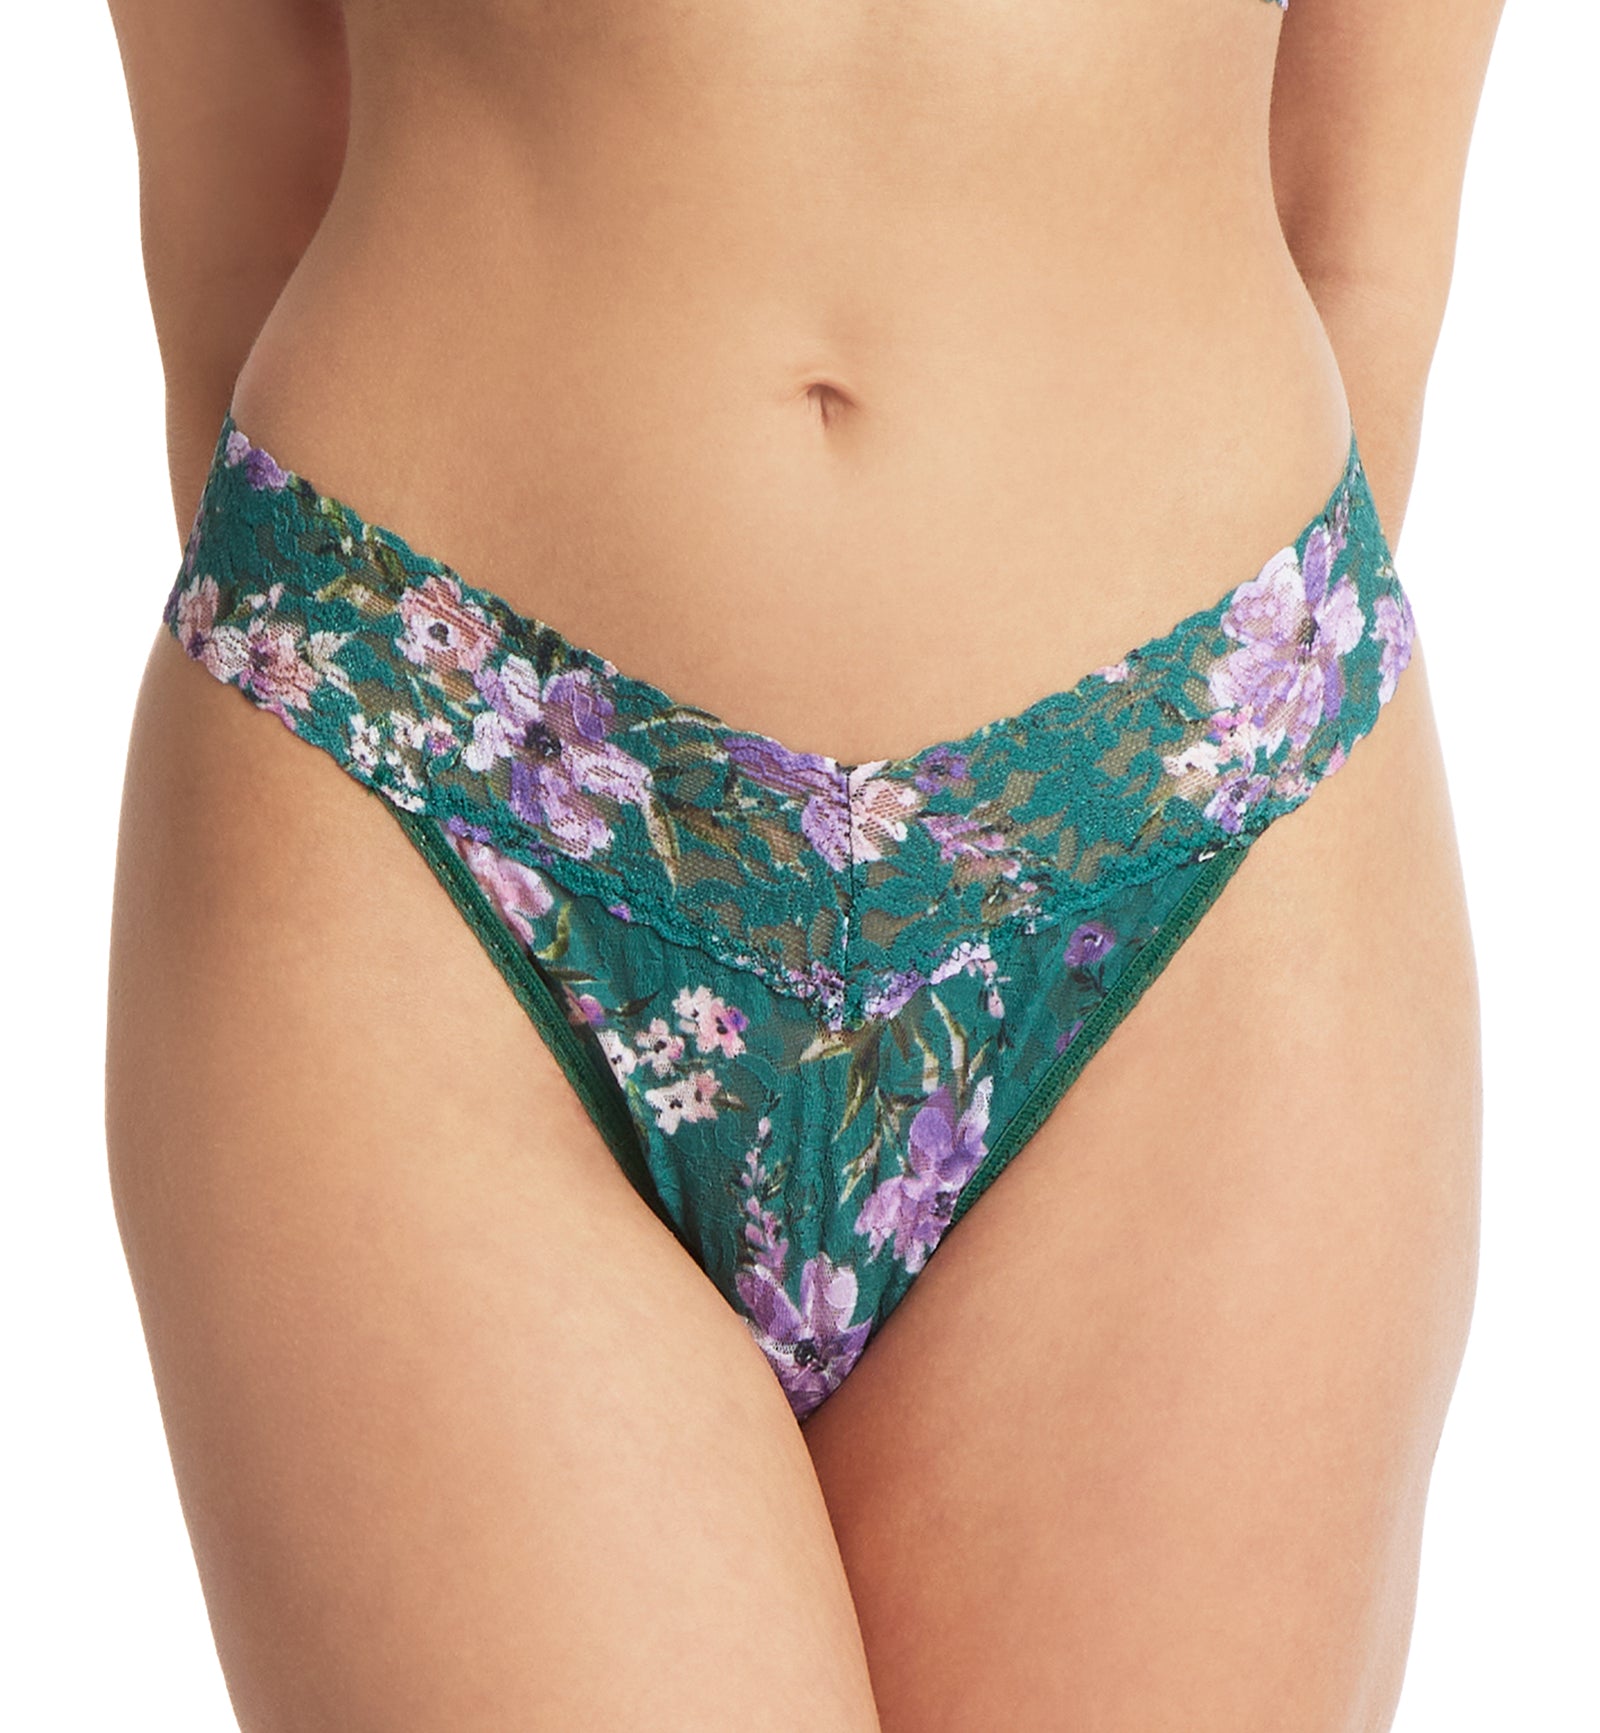 Hanky Panky Signature Lace Printed Original Rise Thong (PR4811P),Flowers In Your Hair - Flowers In Your Hair,One Size